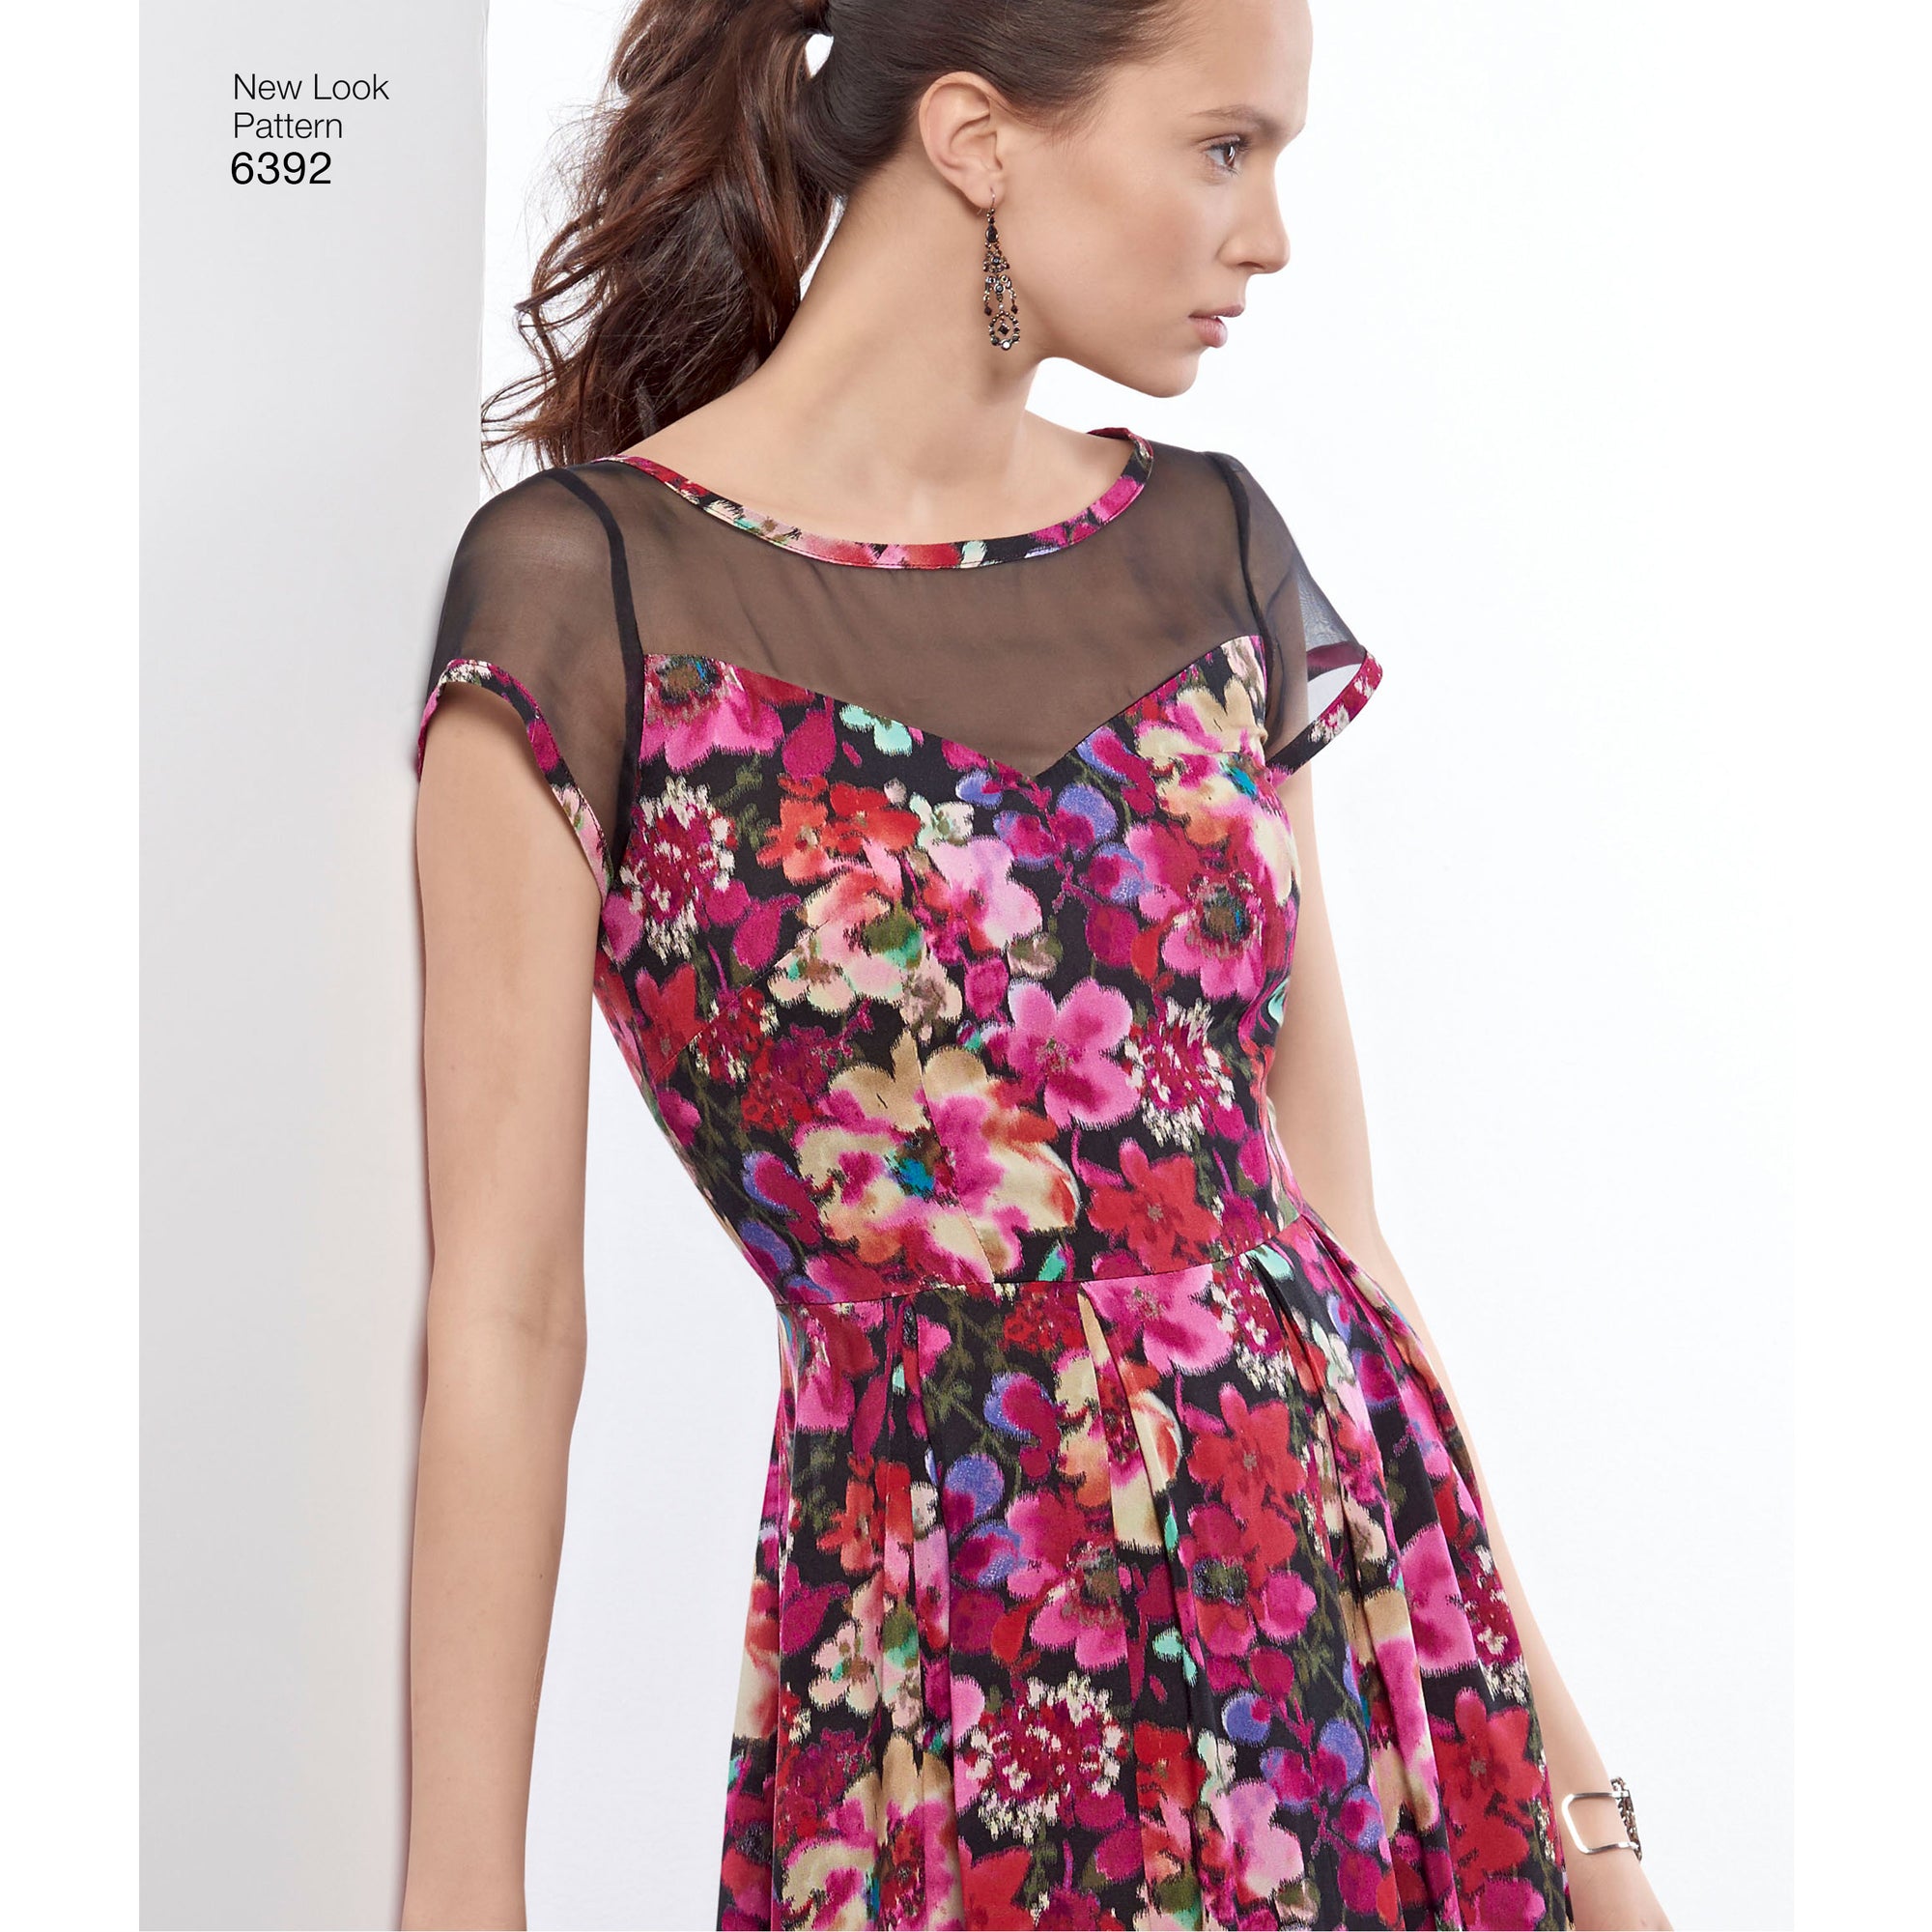 6392 Misses' Dresses with Contrast Fabric Options